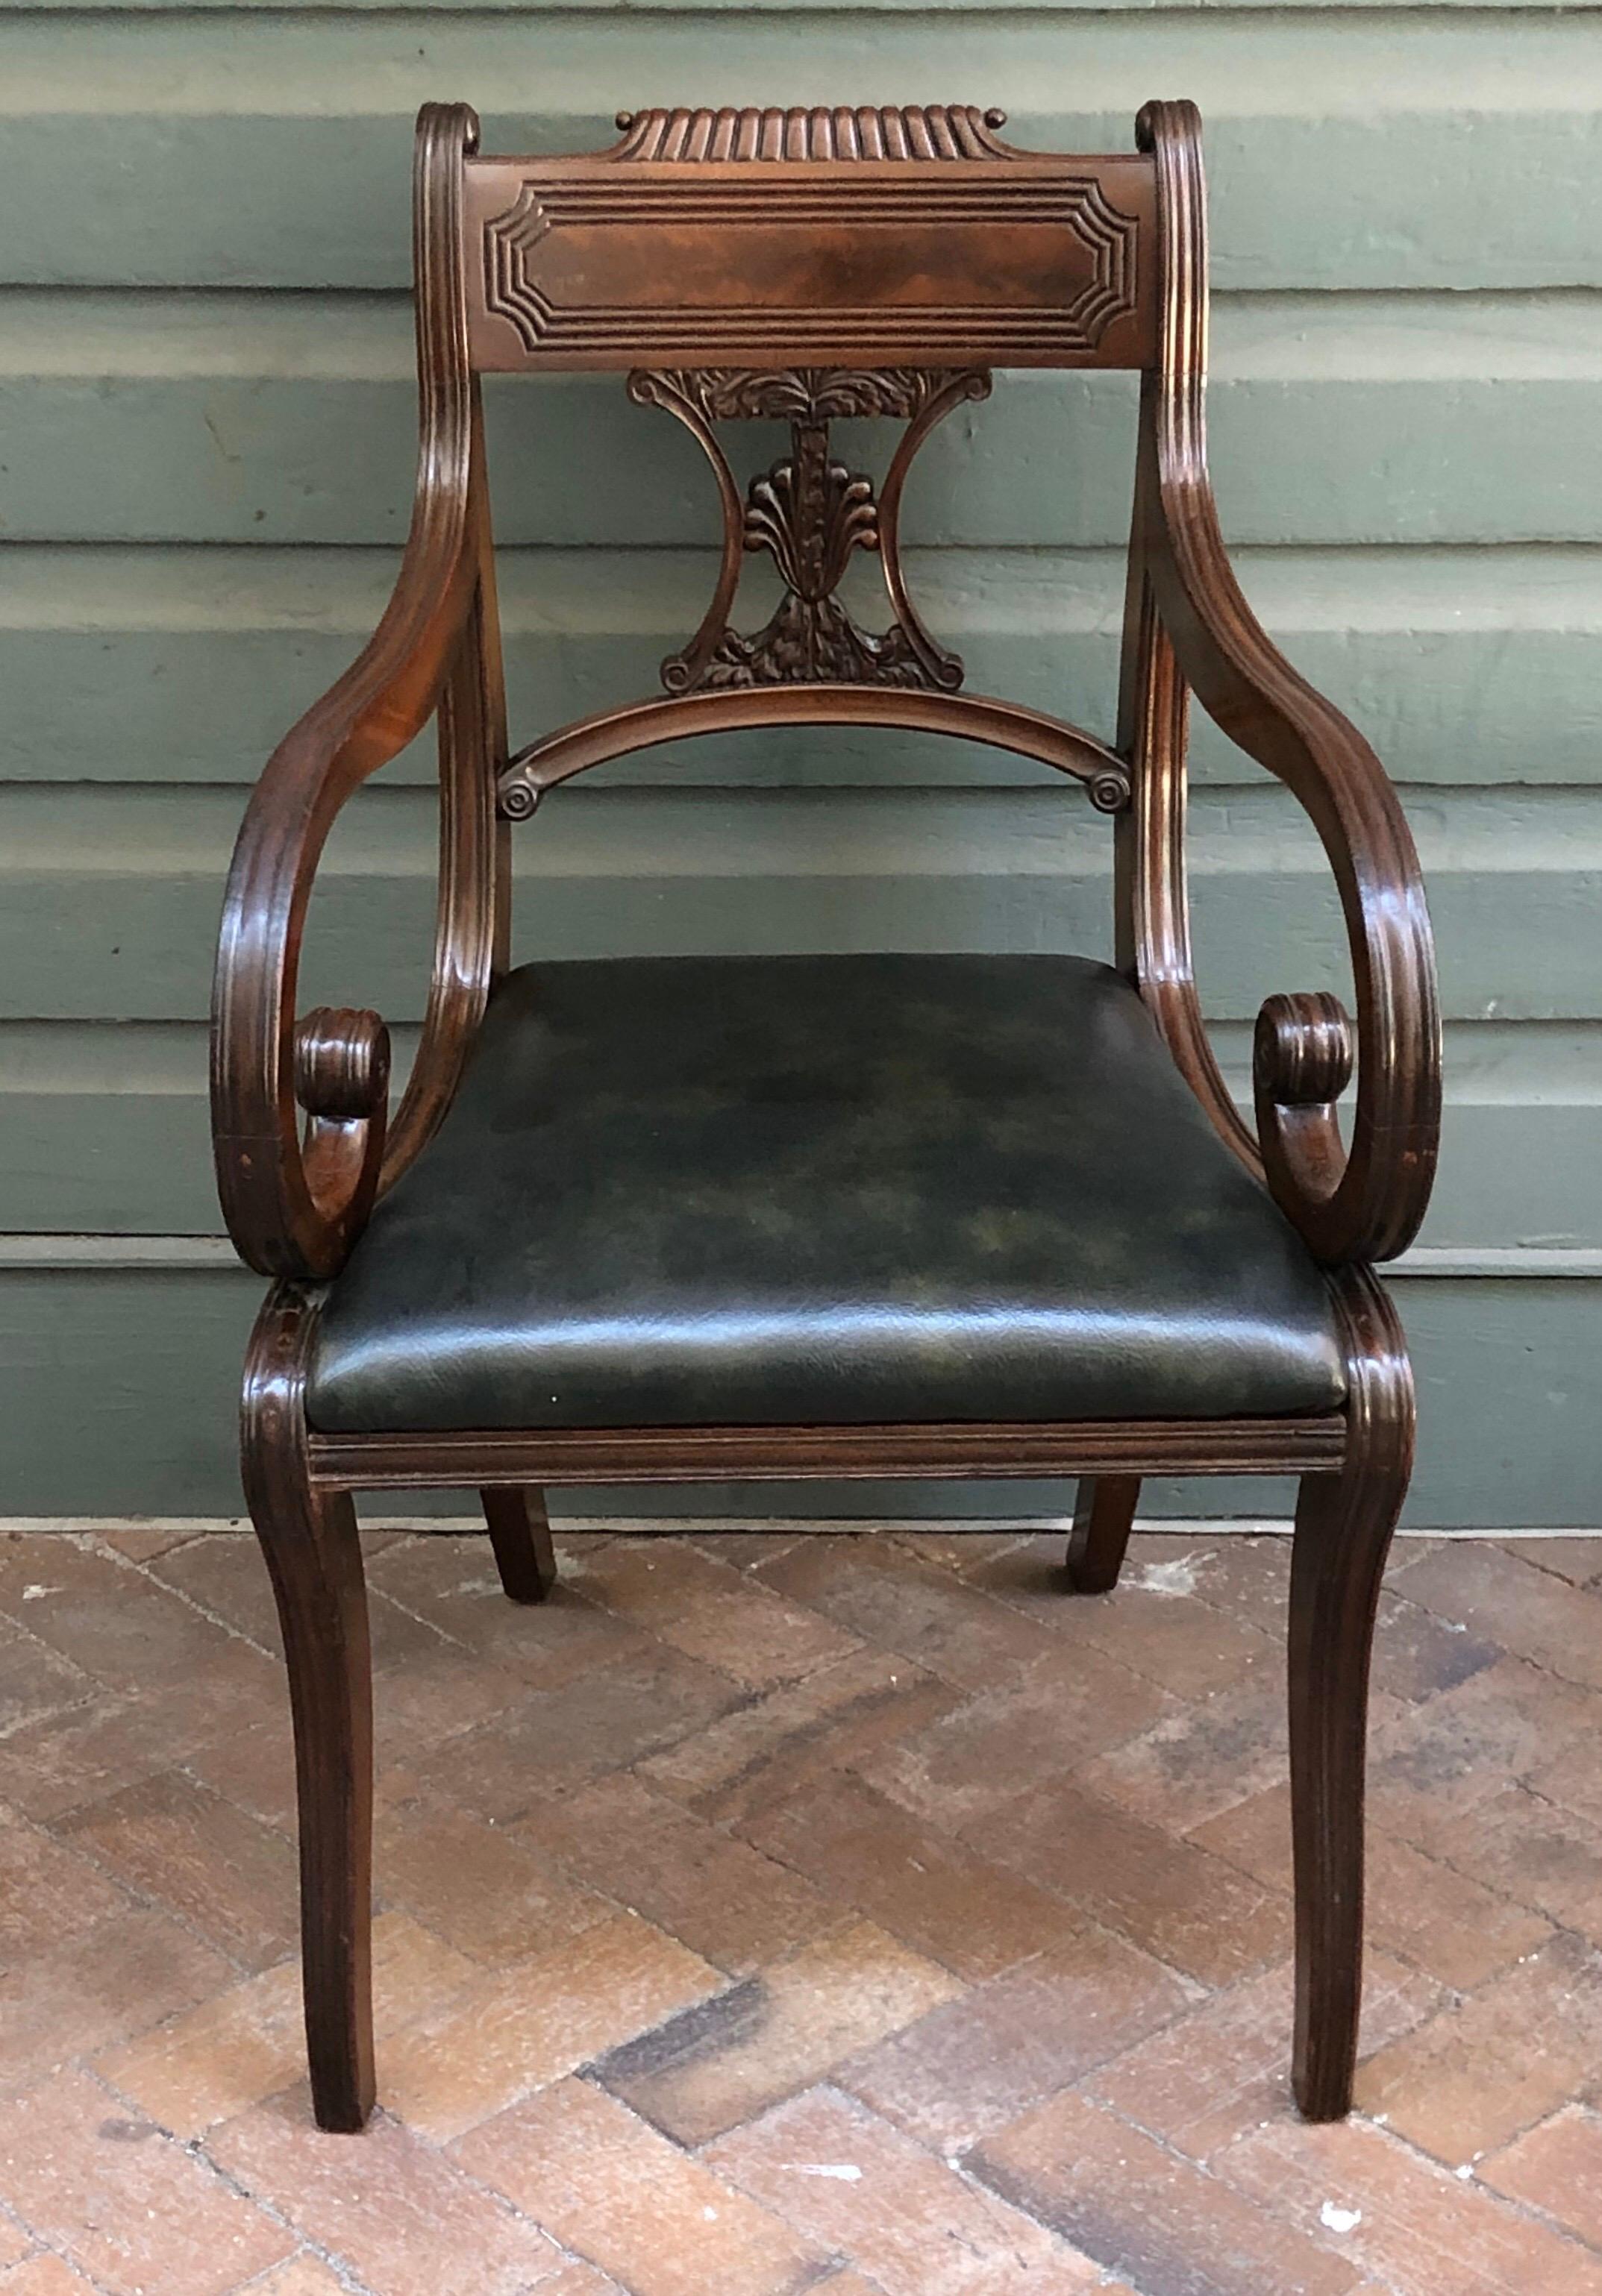 This English set of eight classical Regency saber leg chairs are crafted out solid Cuban mahogany, The backs are unusually carved with a palmetto tree splat. The exceptionally craved chairs have a beautiful reeded scroll top crest rail with reeding